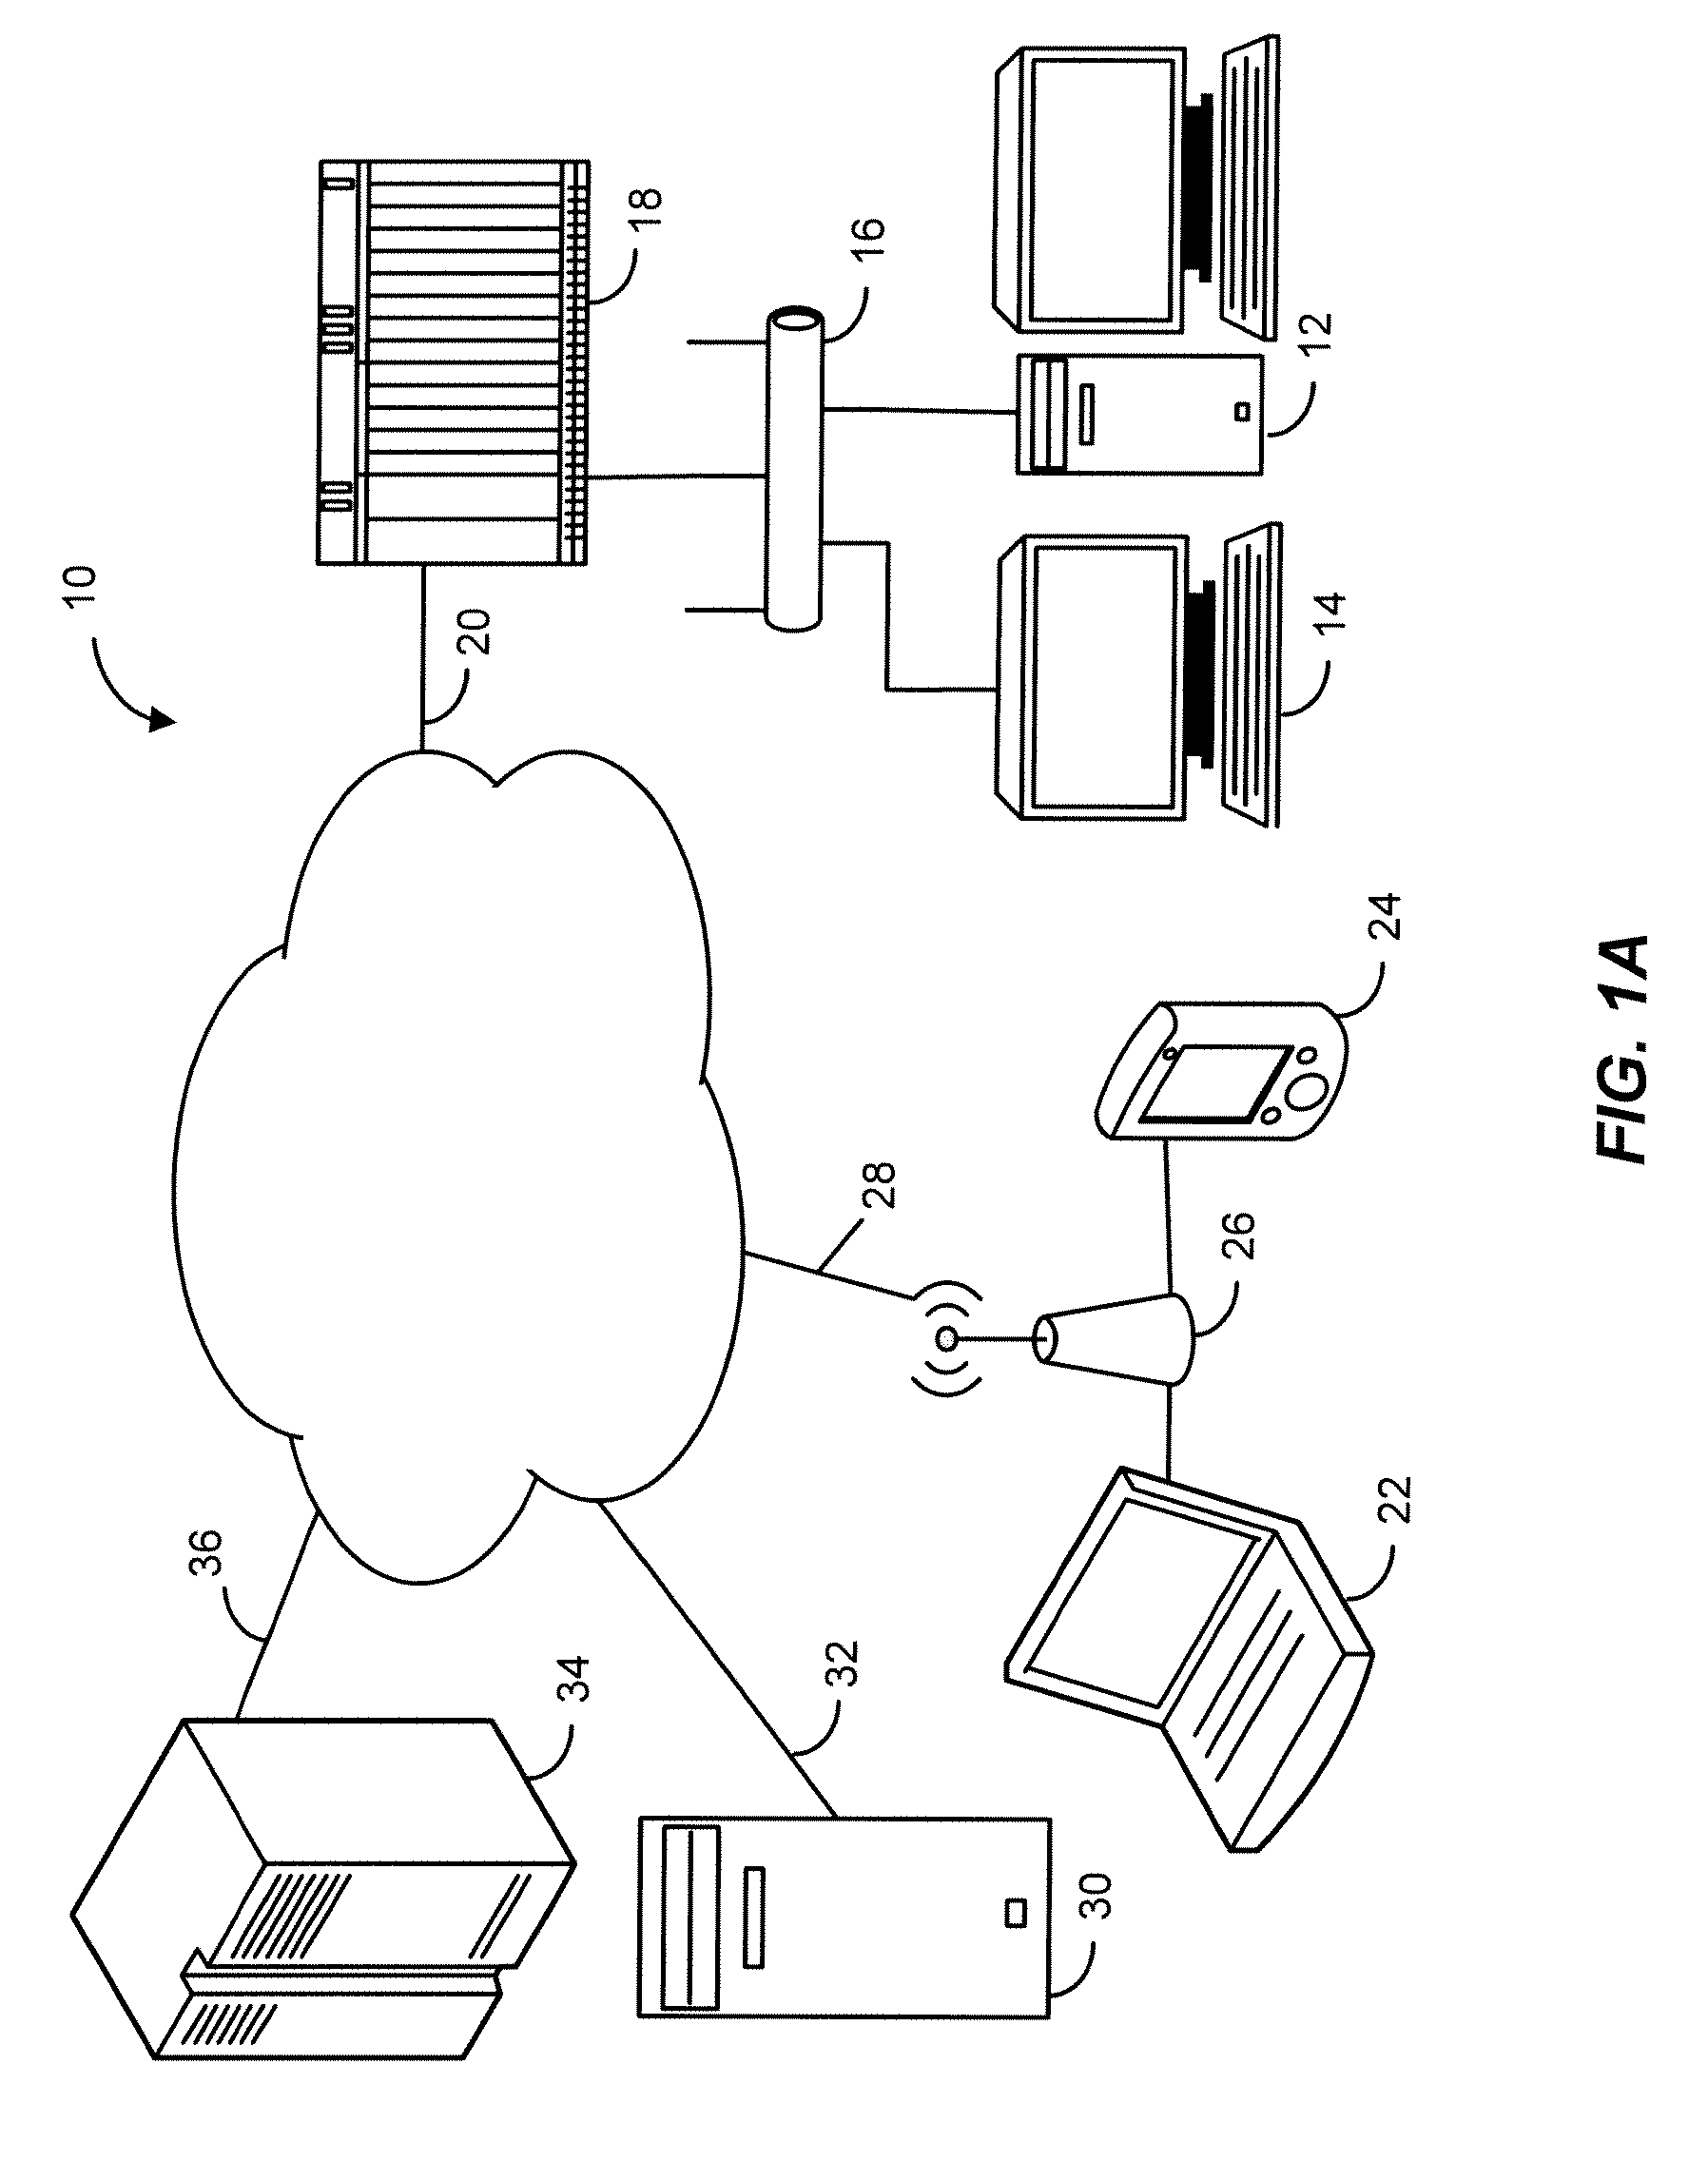 Method and System for Electronically Processing Mortgage-Backed Securities